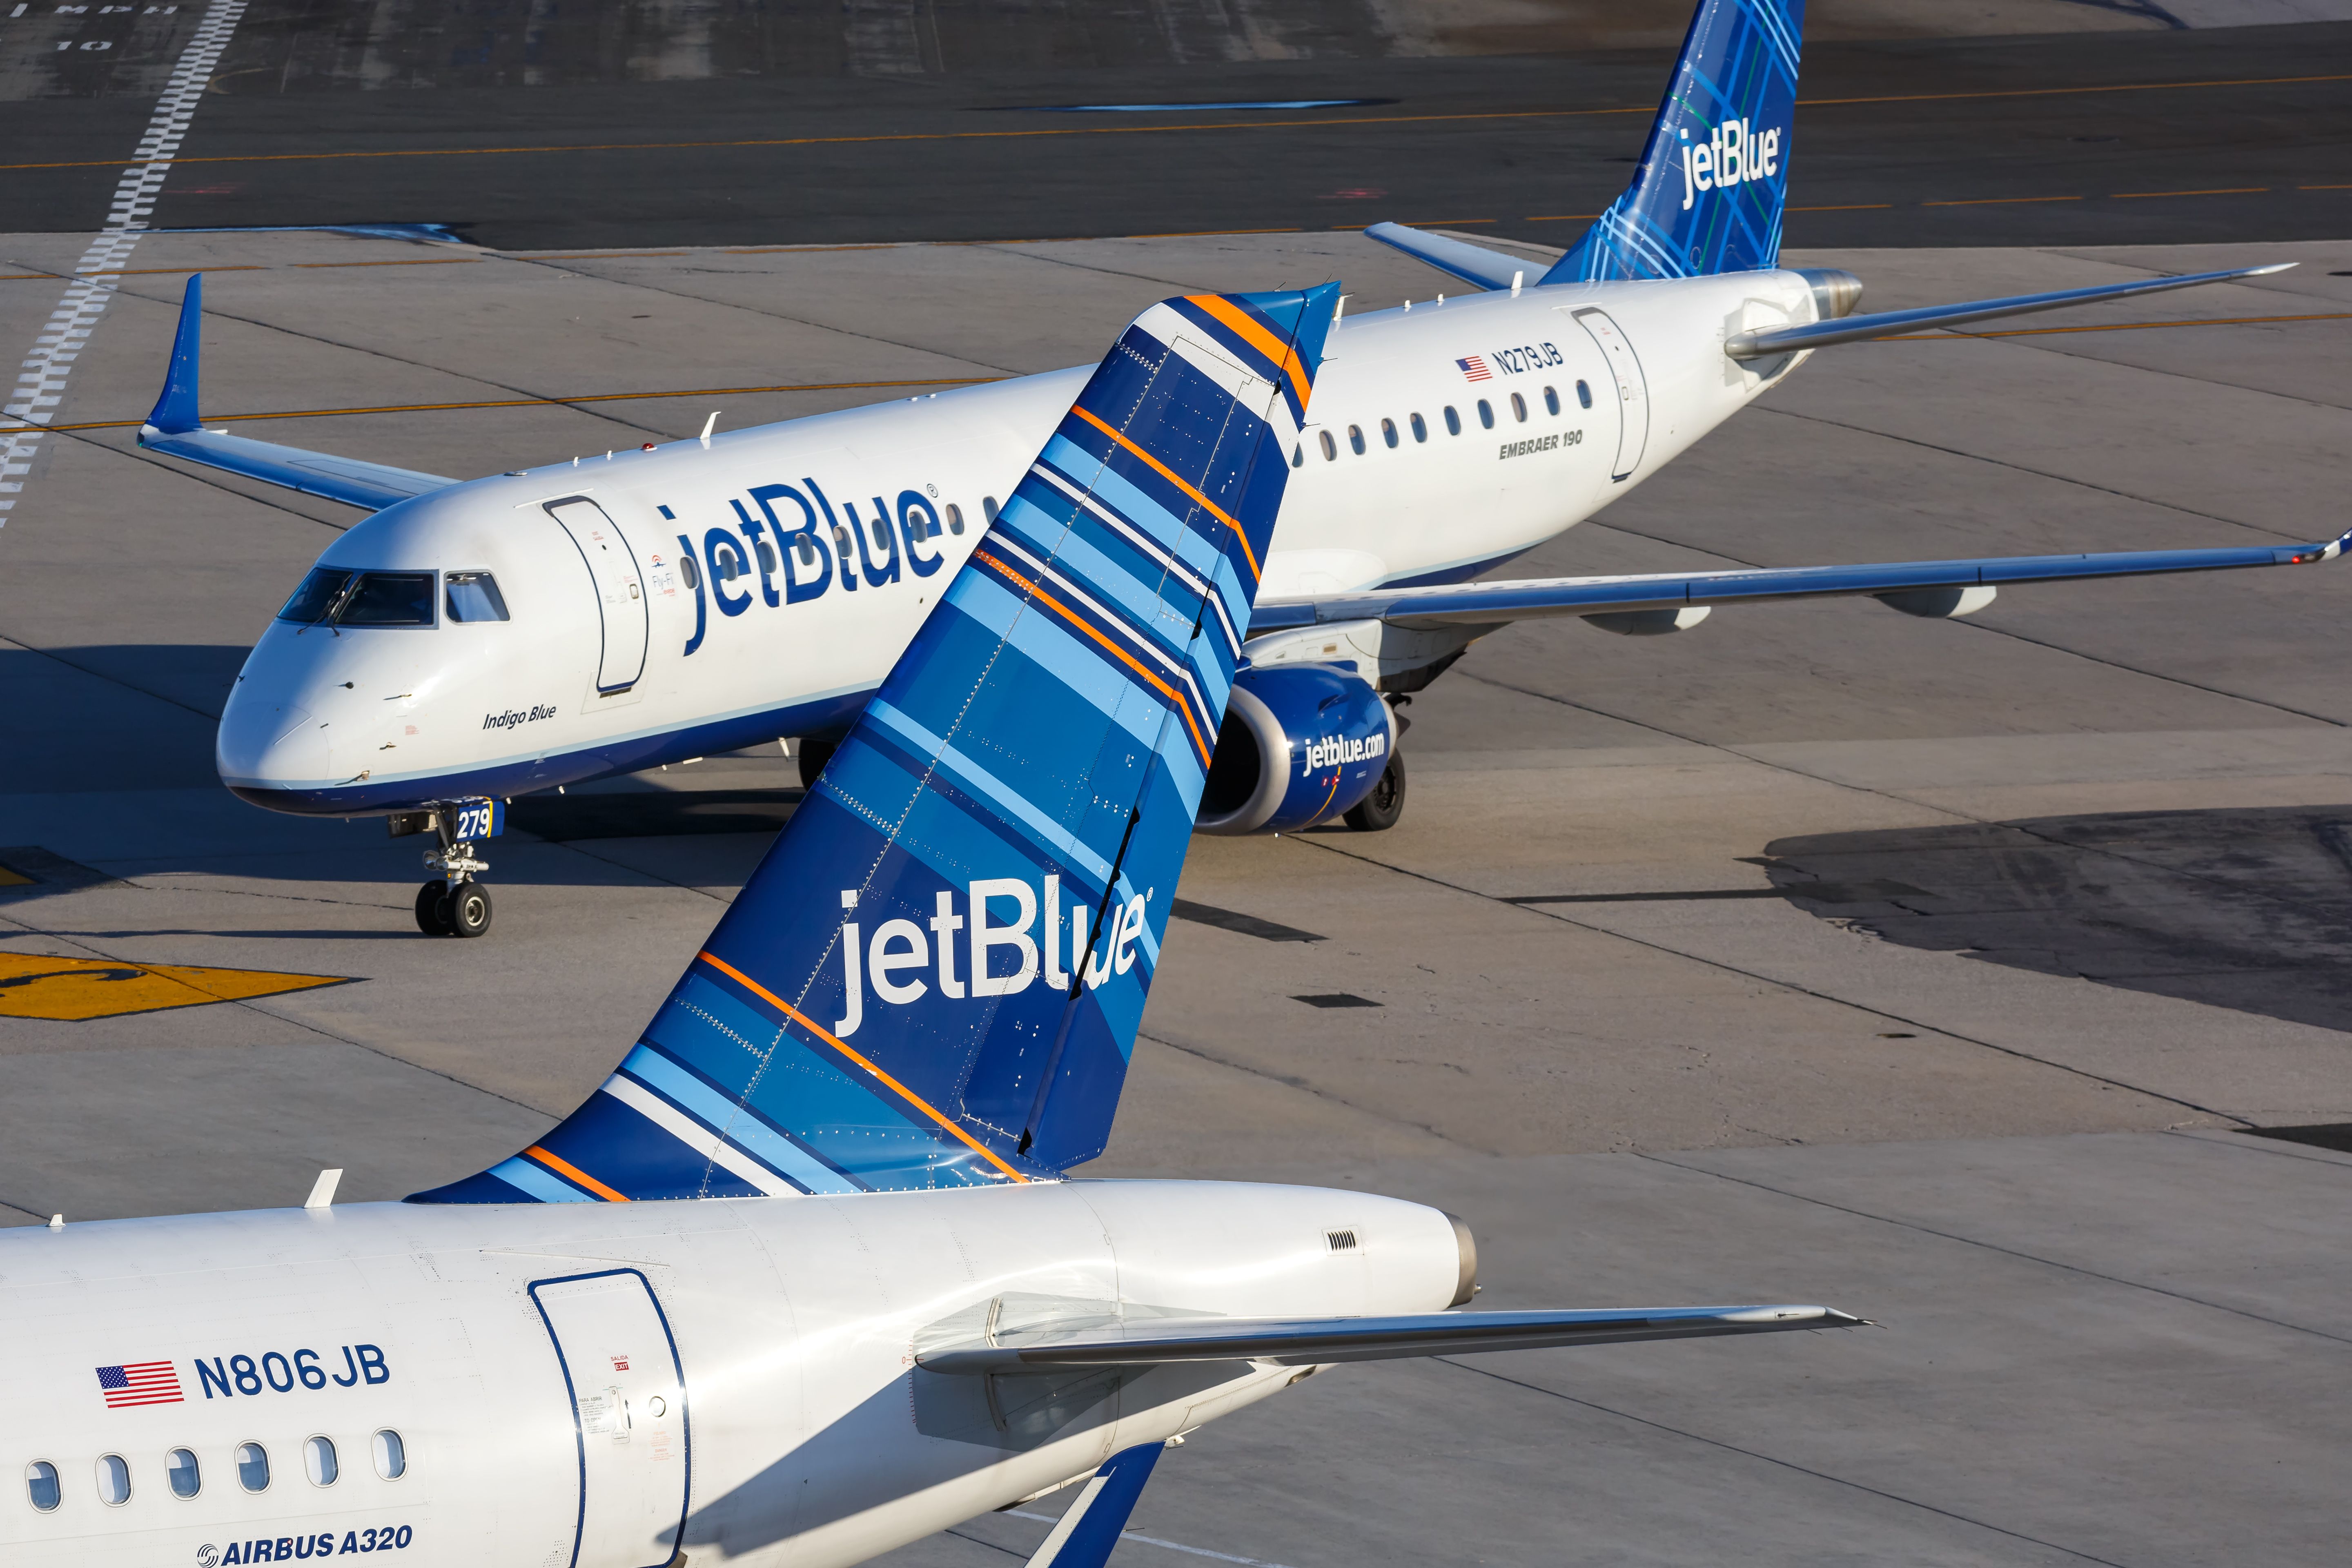 A JetBlue Embraer 190 on the apron at New York JFK airport.